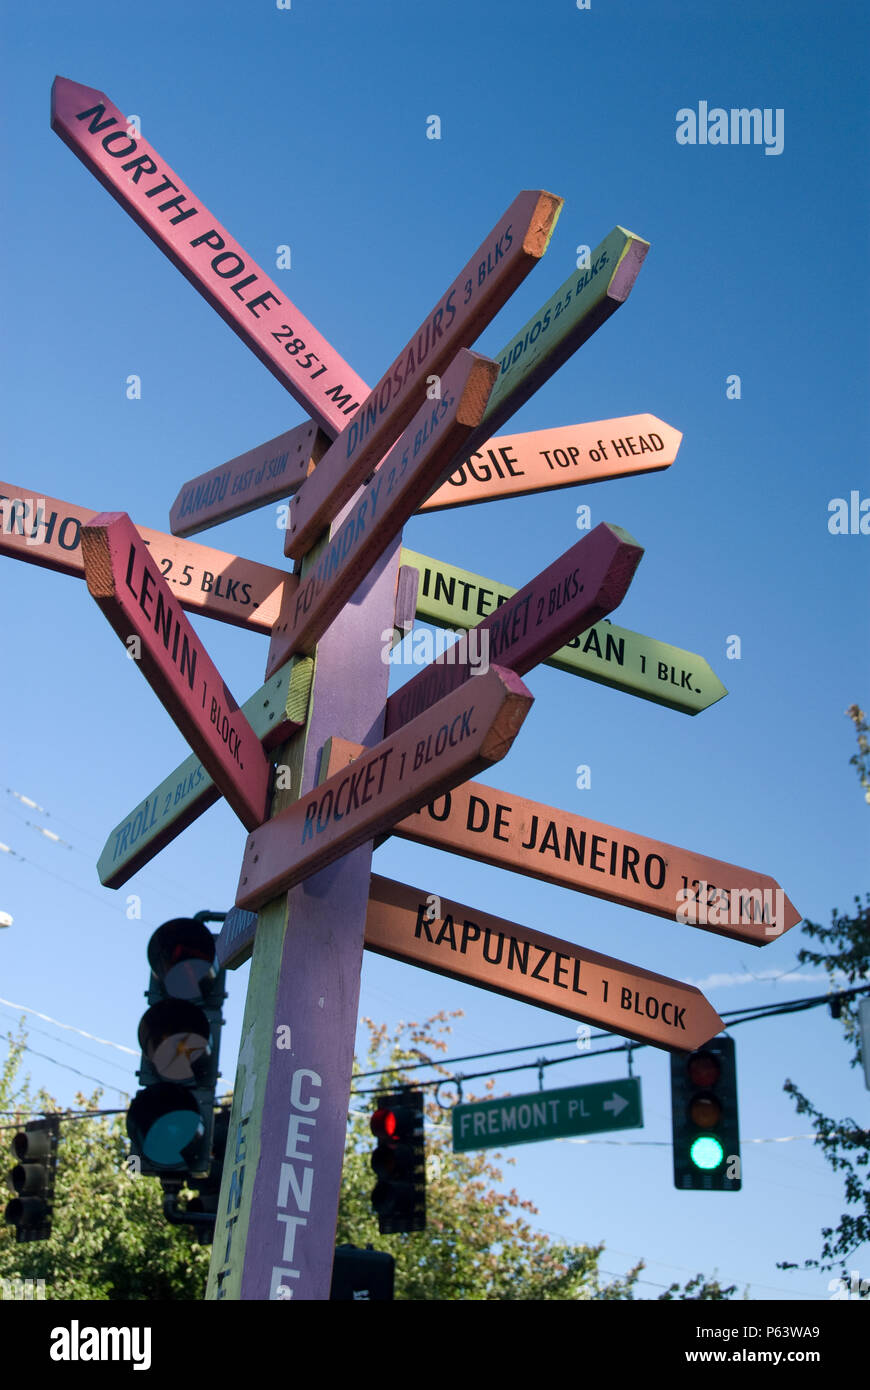 A directional sign shows the direction and distance to worldwide and local sites from the Fremont neighborhood of Seattle, Washington. Stock Photo